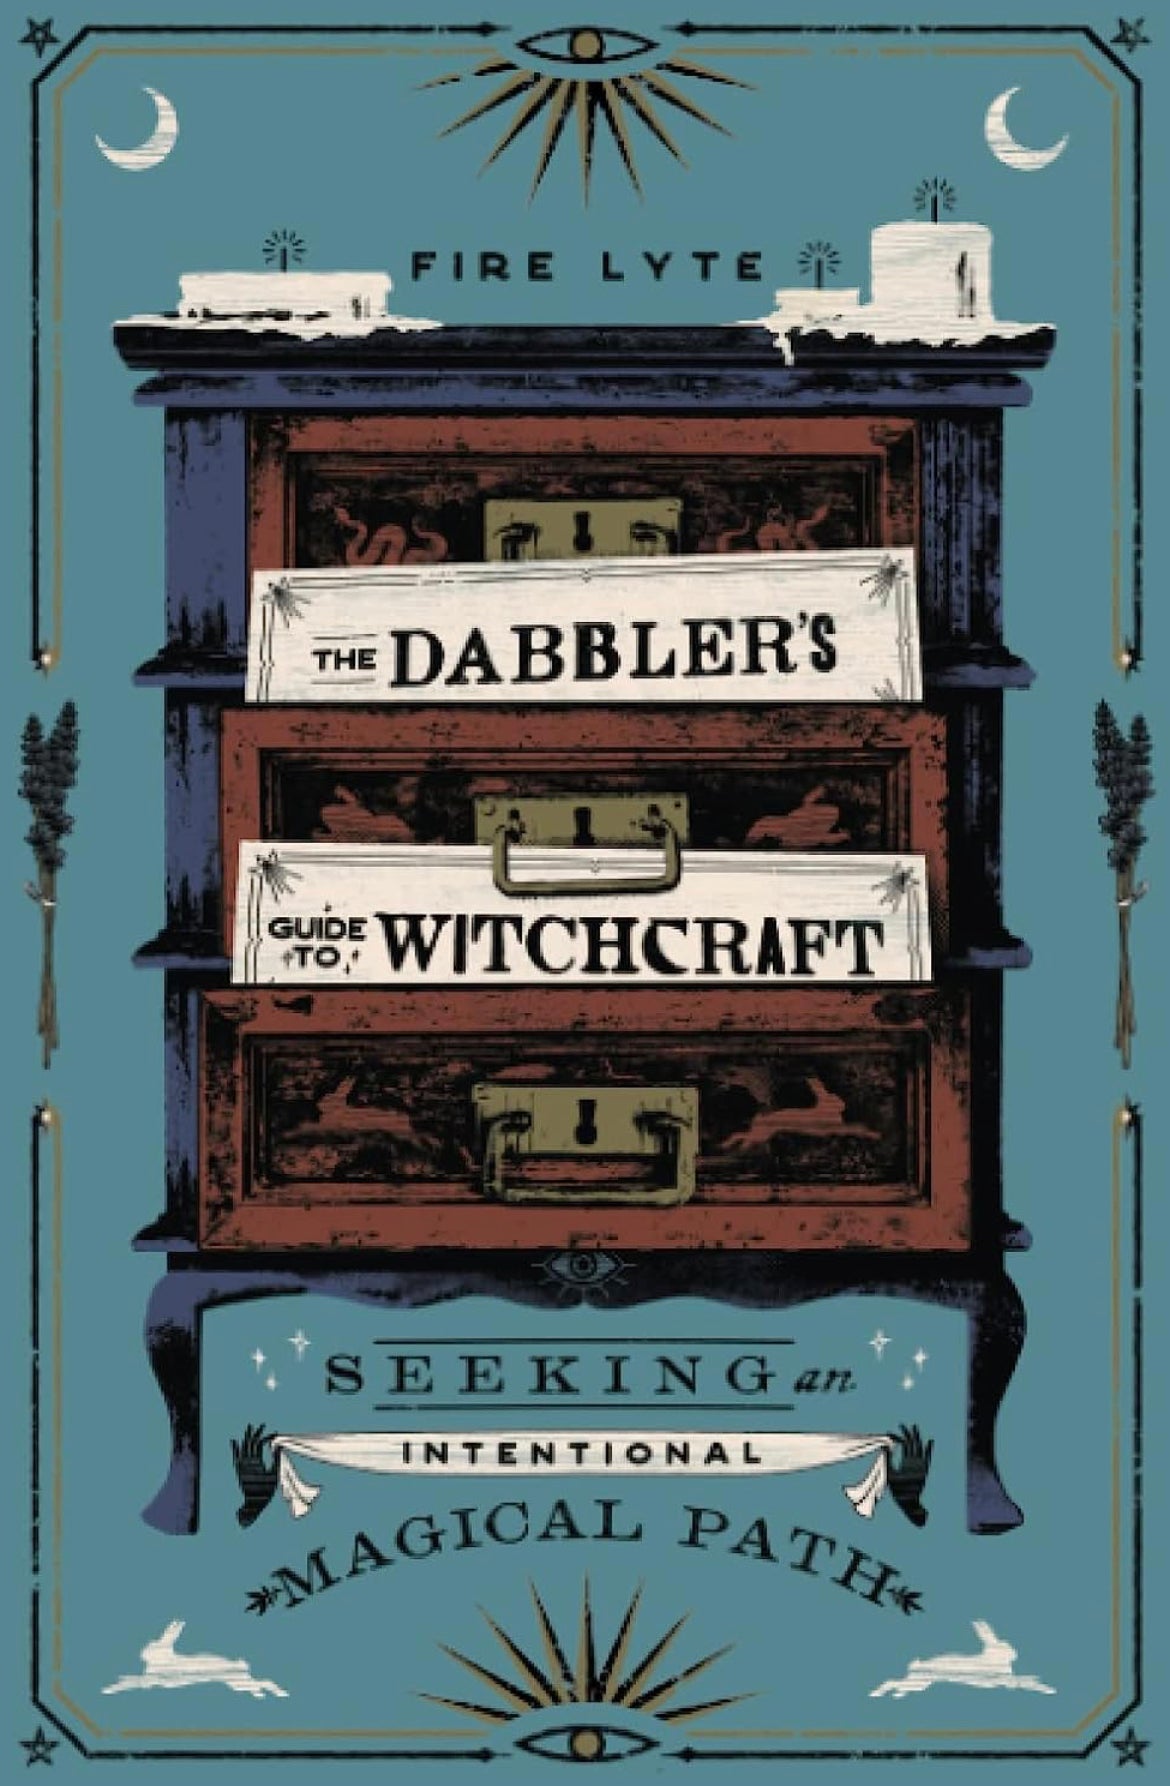 Dabbler’s Guide to Witchcraft: Seeking an Intentional Magic